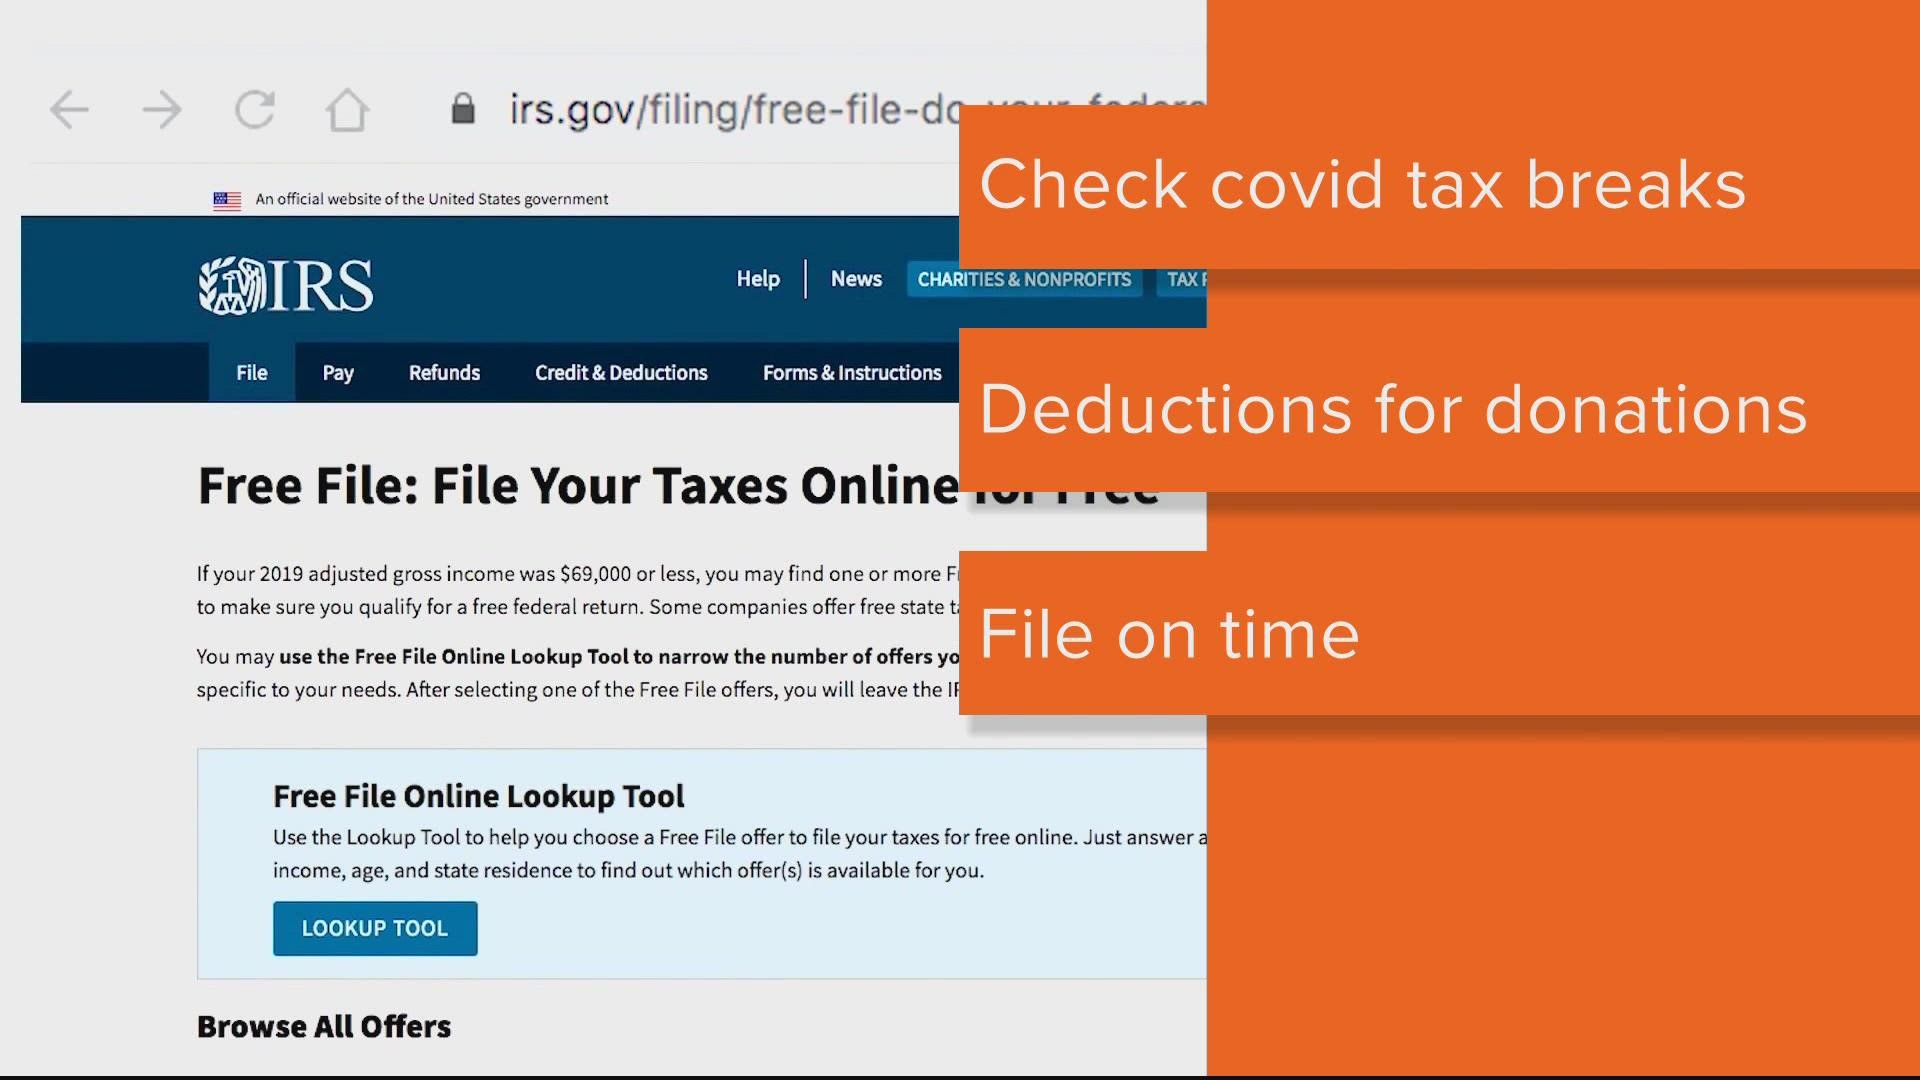 Here are some hints for filing your taxes from experts.